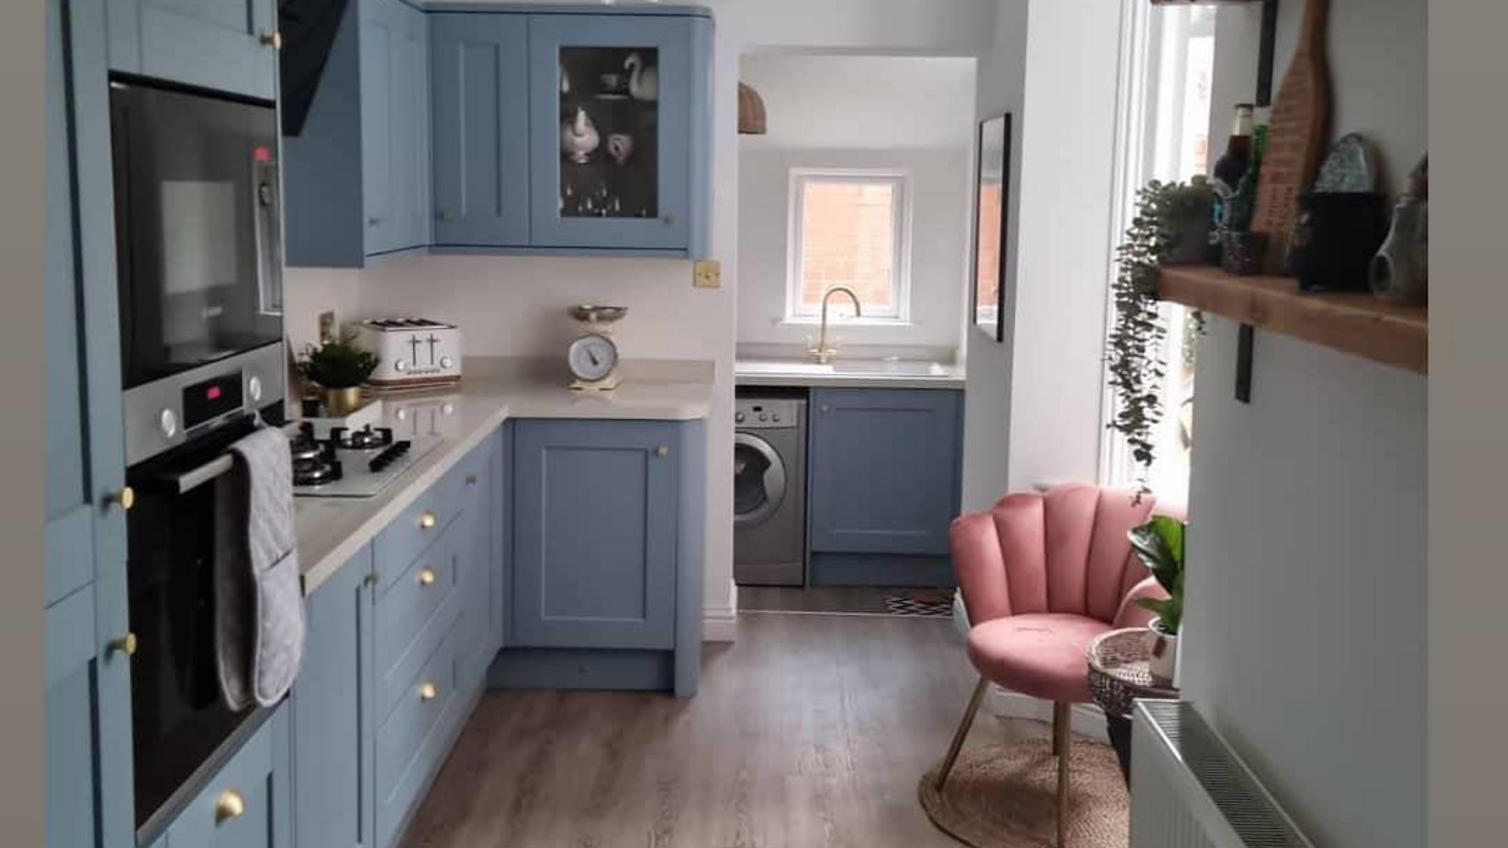 Blue shaker kitchen idea in a single wall layout with brass cup handles, beige worktops, and built in appliances.